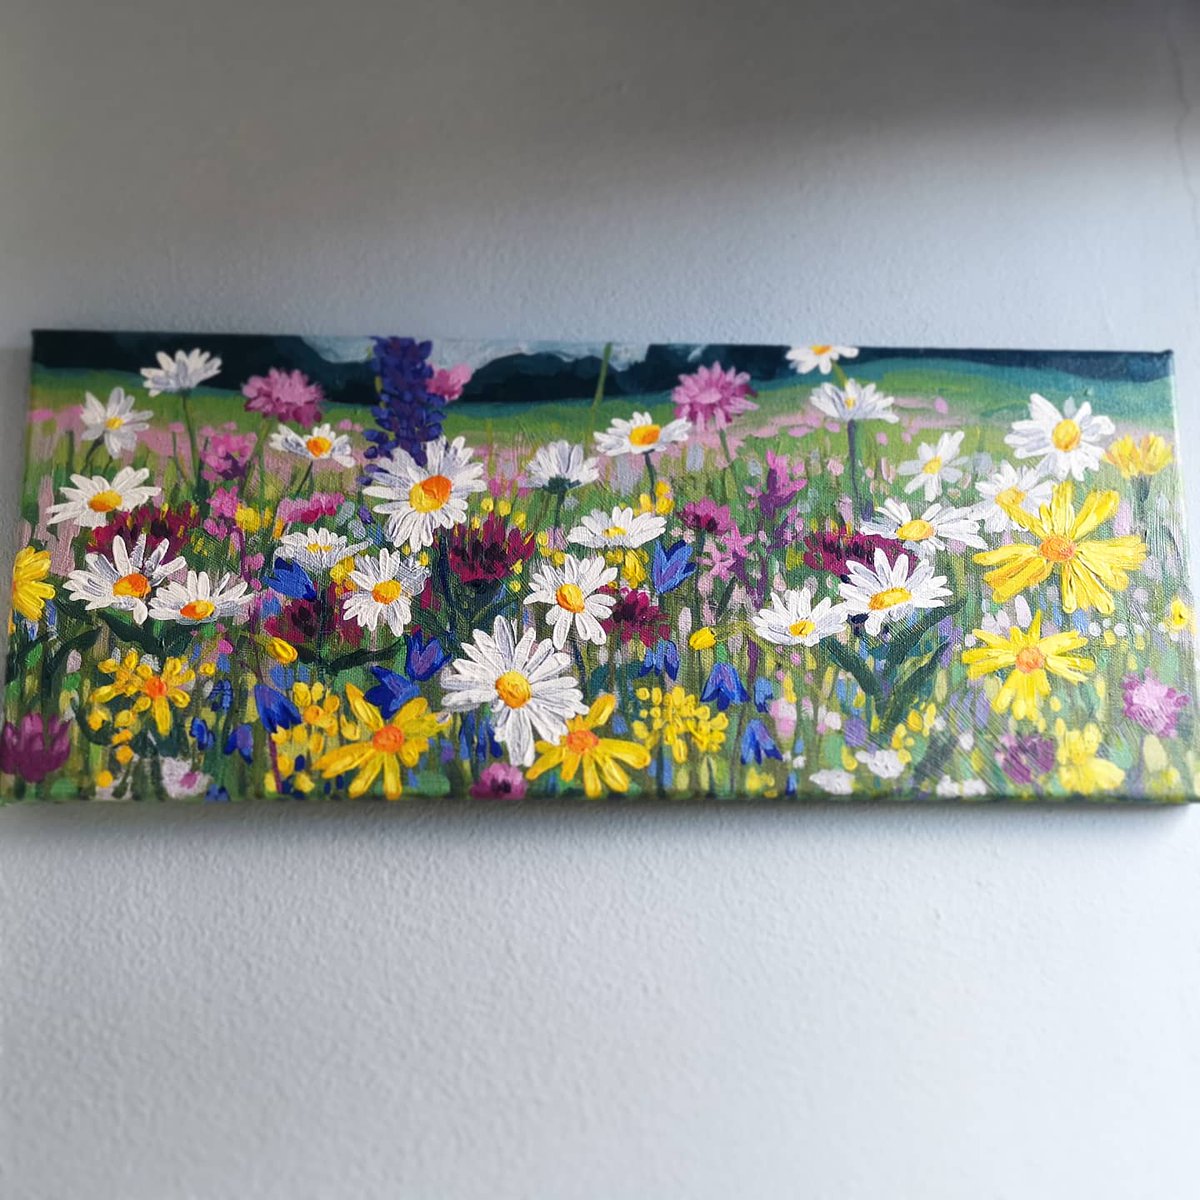 Some wildflowers inspired by the Pyrenees fields 🎨🌸 #wildflowers #wildflowerart #originalart #flowers #flowerart #flowerpainting #handpainted #art #outdoors #